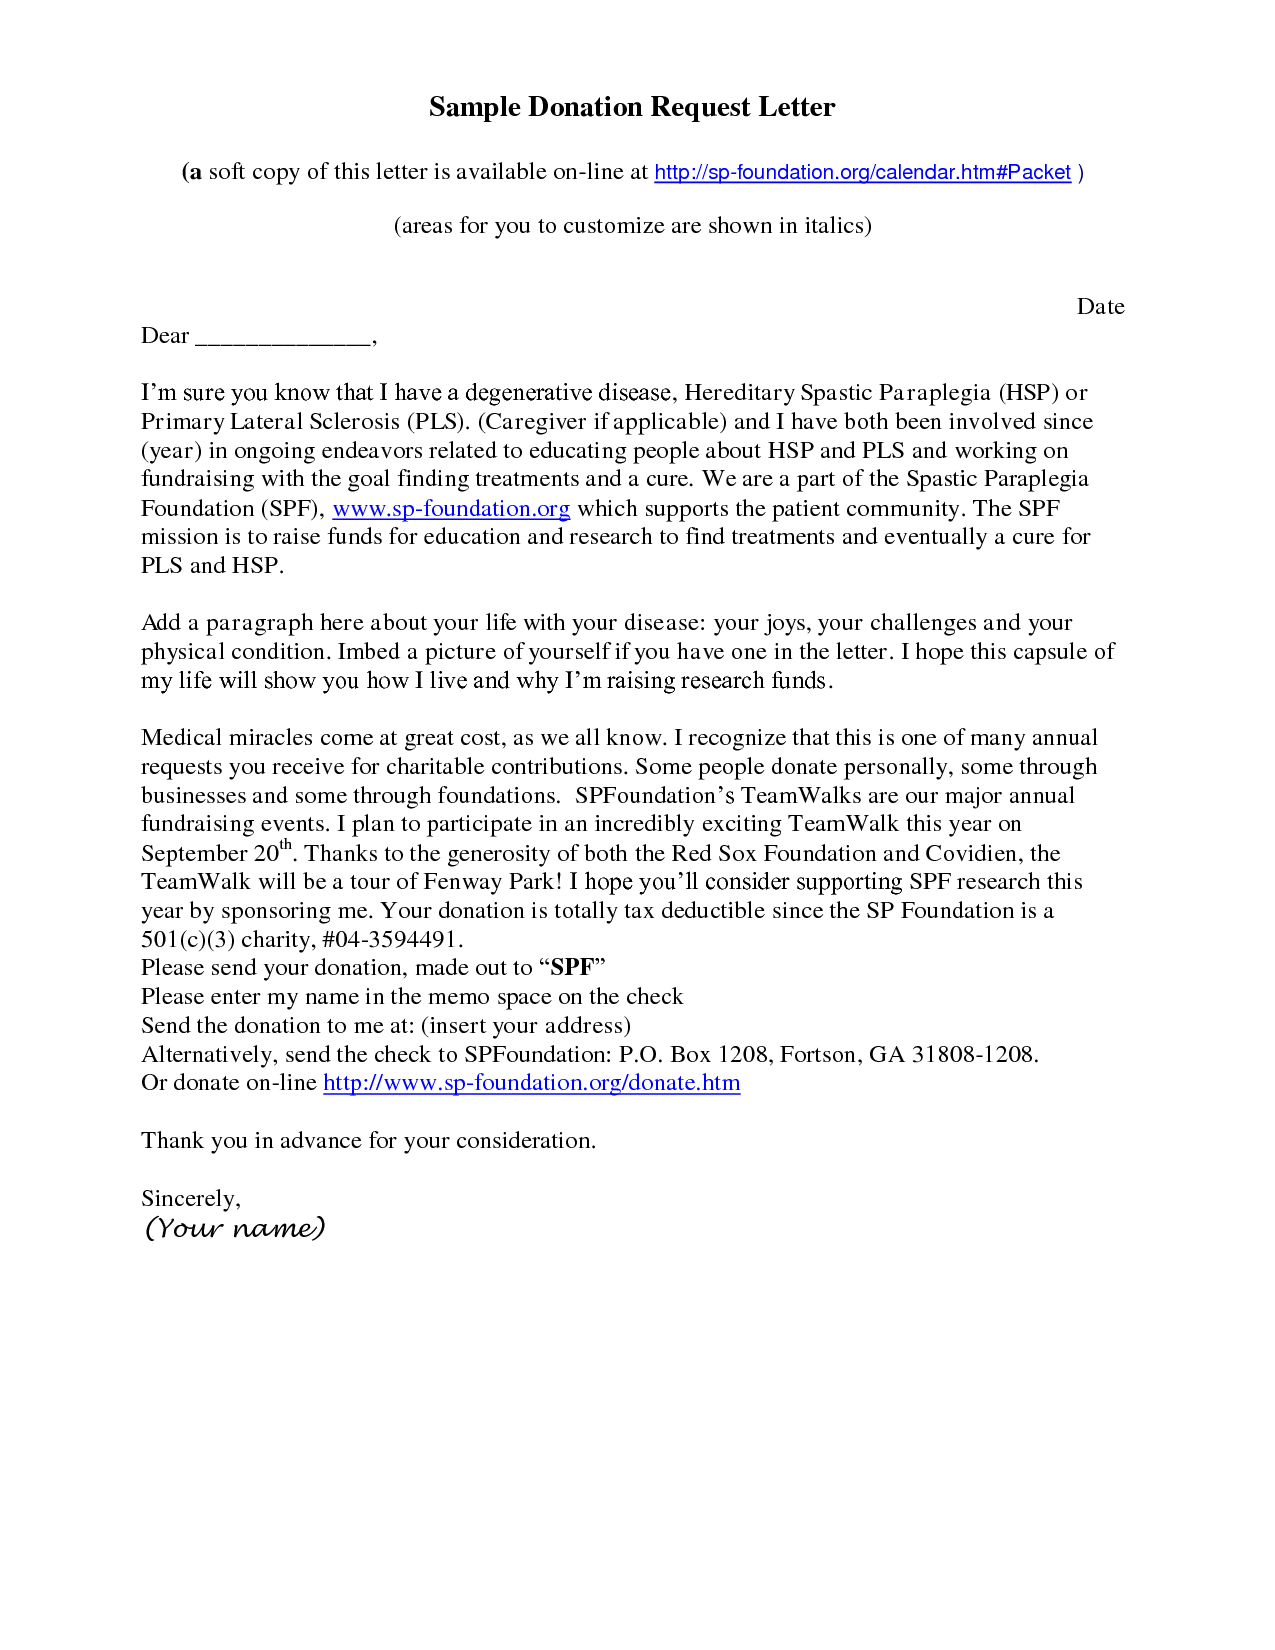 Donation Request Letter Template - How to Write A solicitation Letter for Donations Choice Image